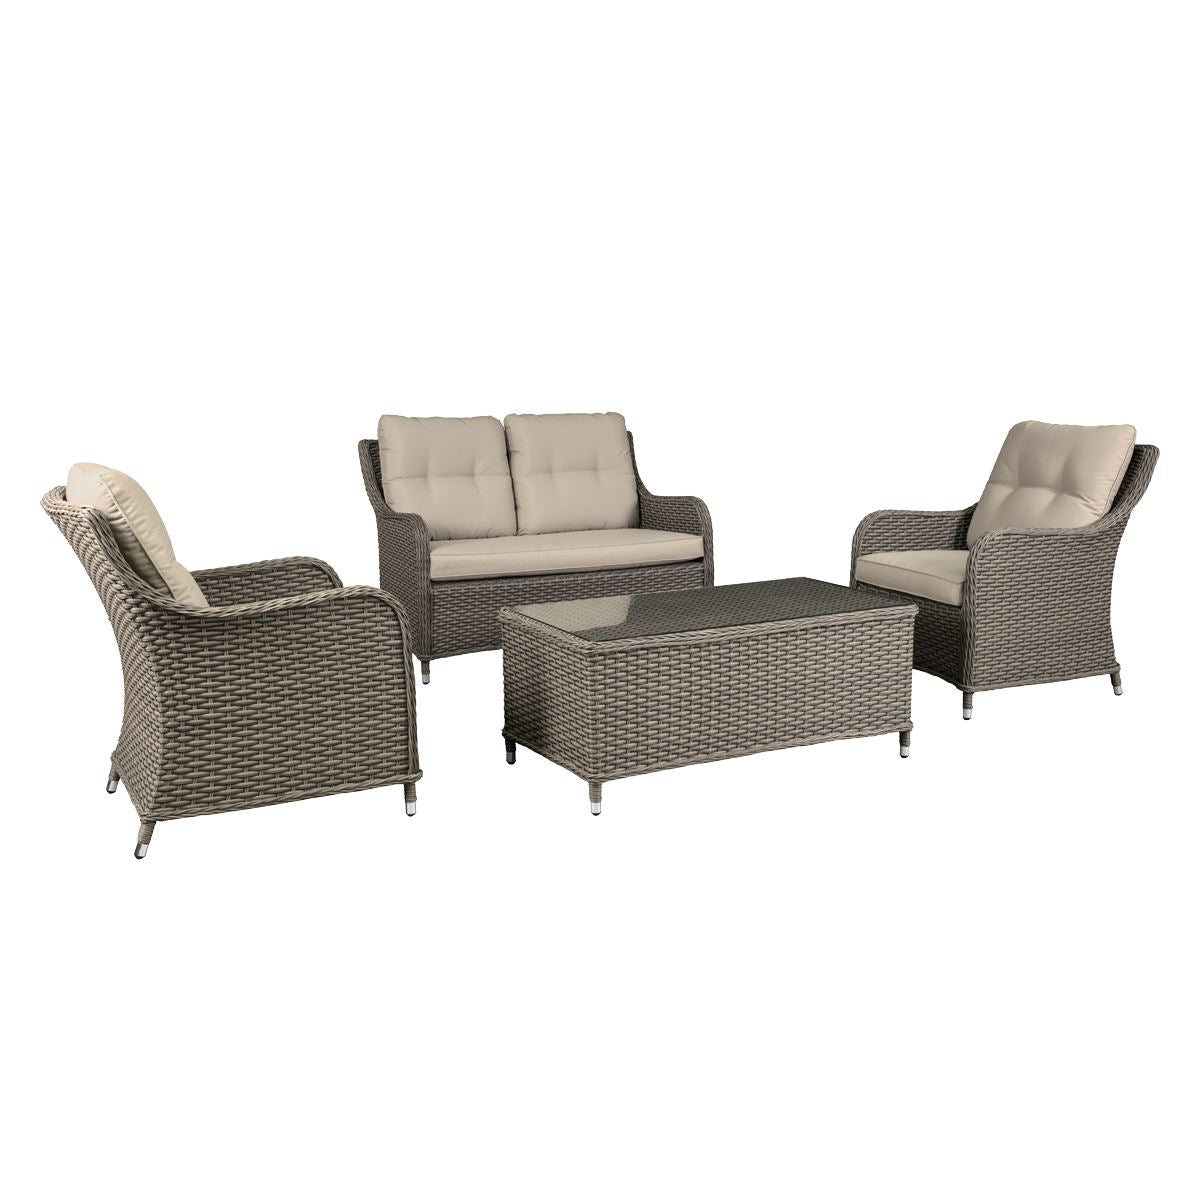 Dellonda Chester 4 Piece Outdoor Rattan Lounge Set with Double Seater Sofa, Brown - DG87